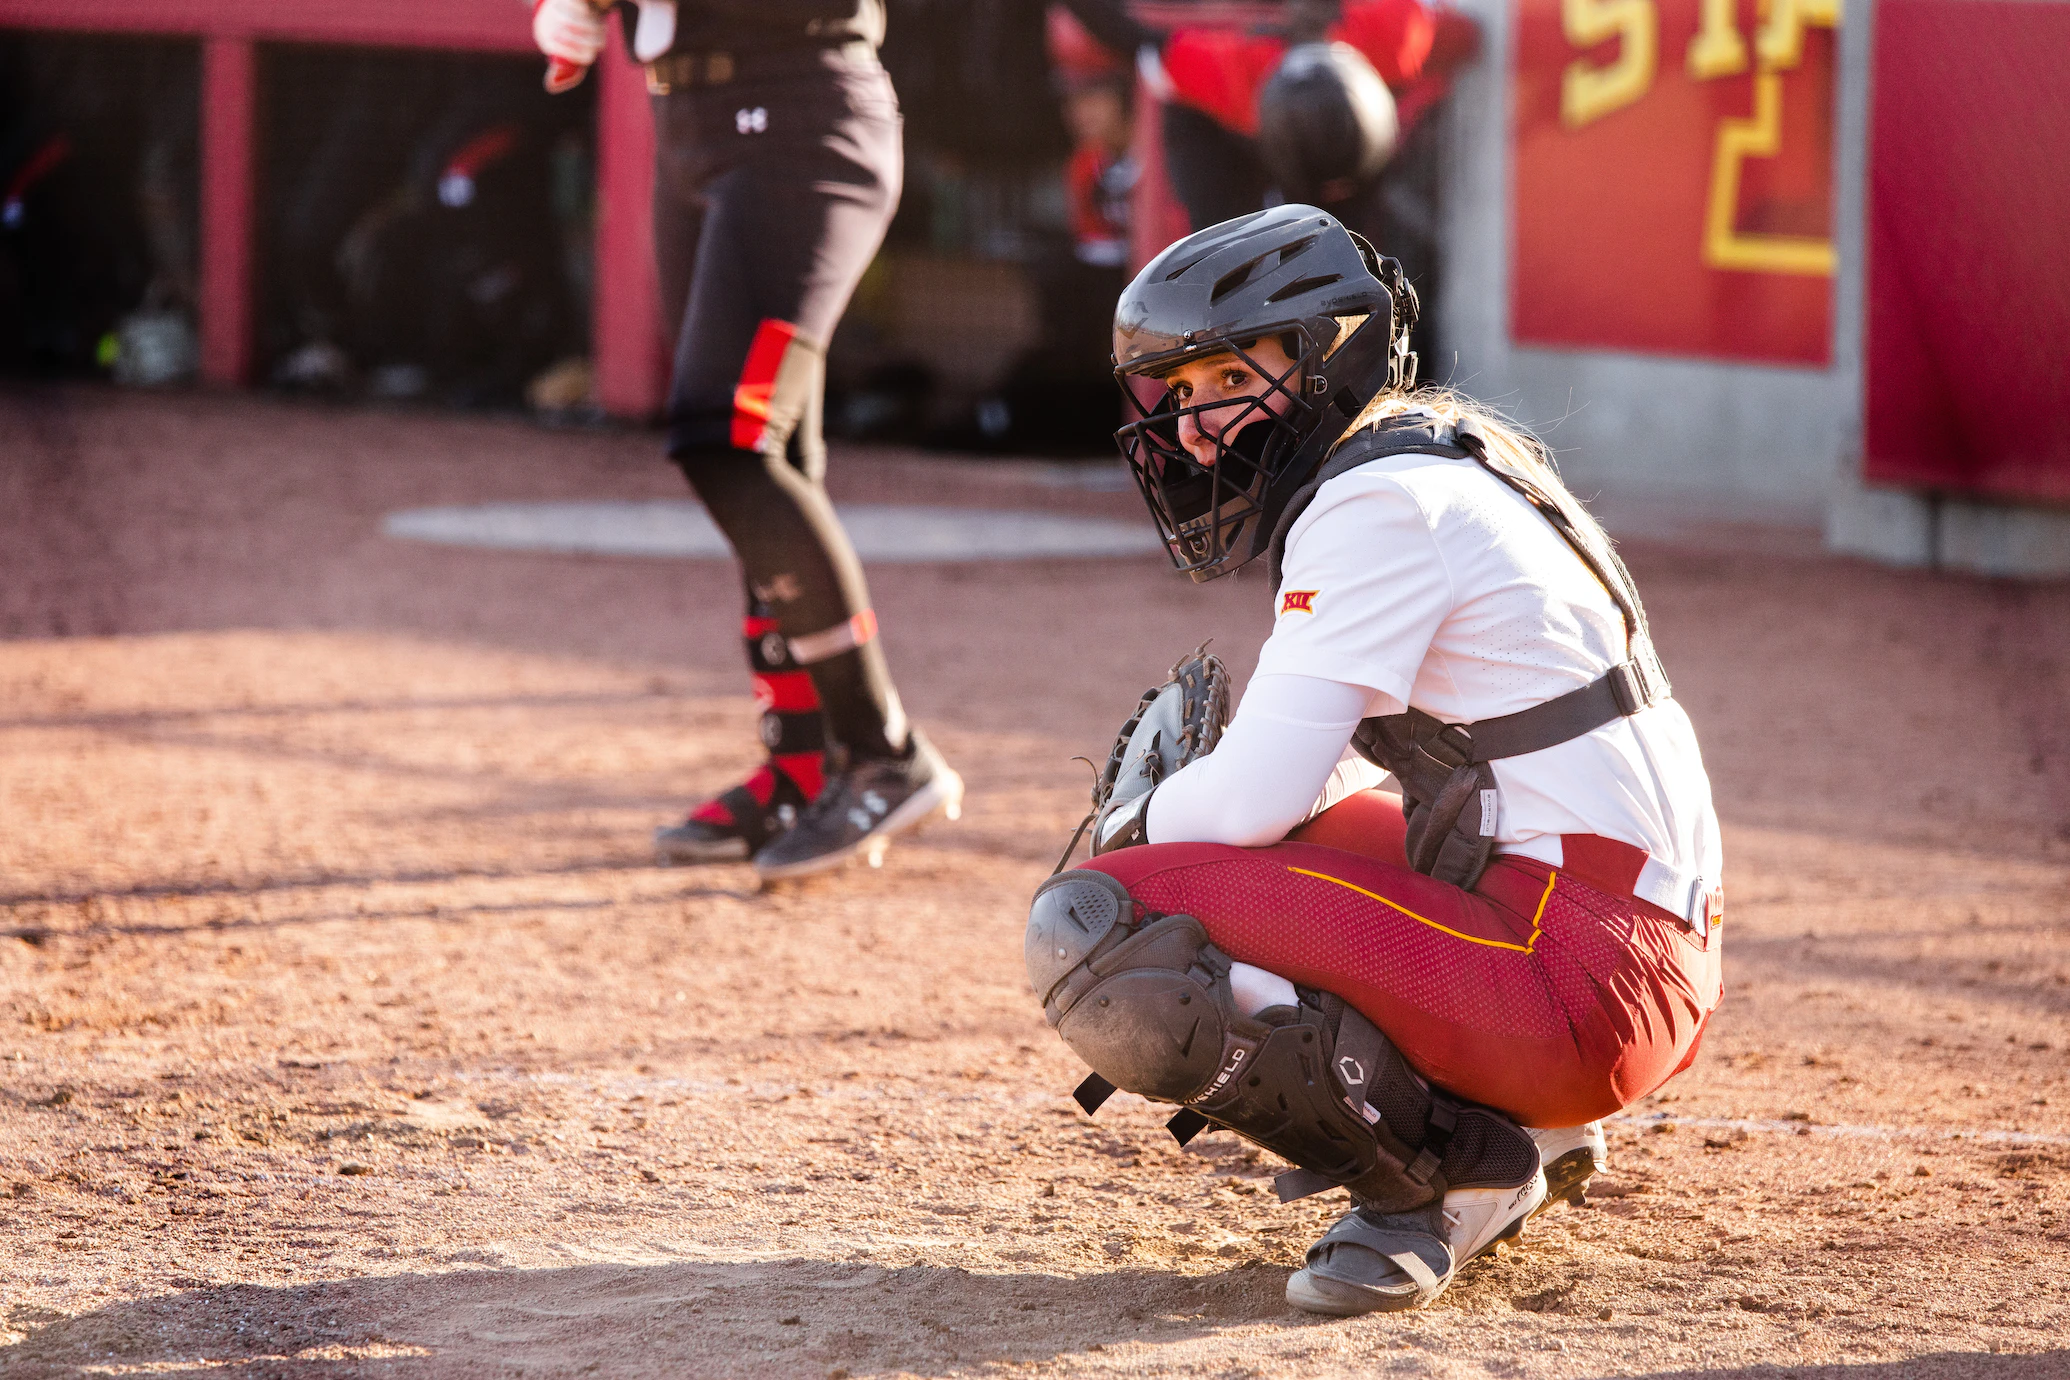 How to find the right Fastpitch Softball Helmet